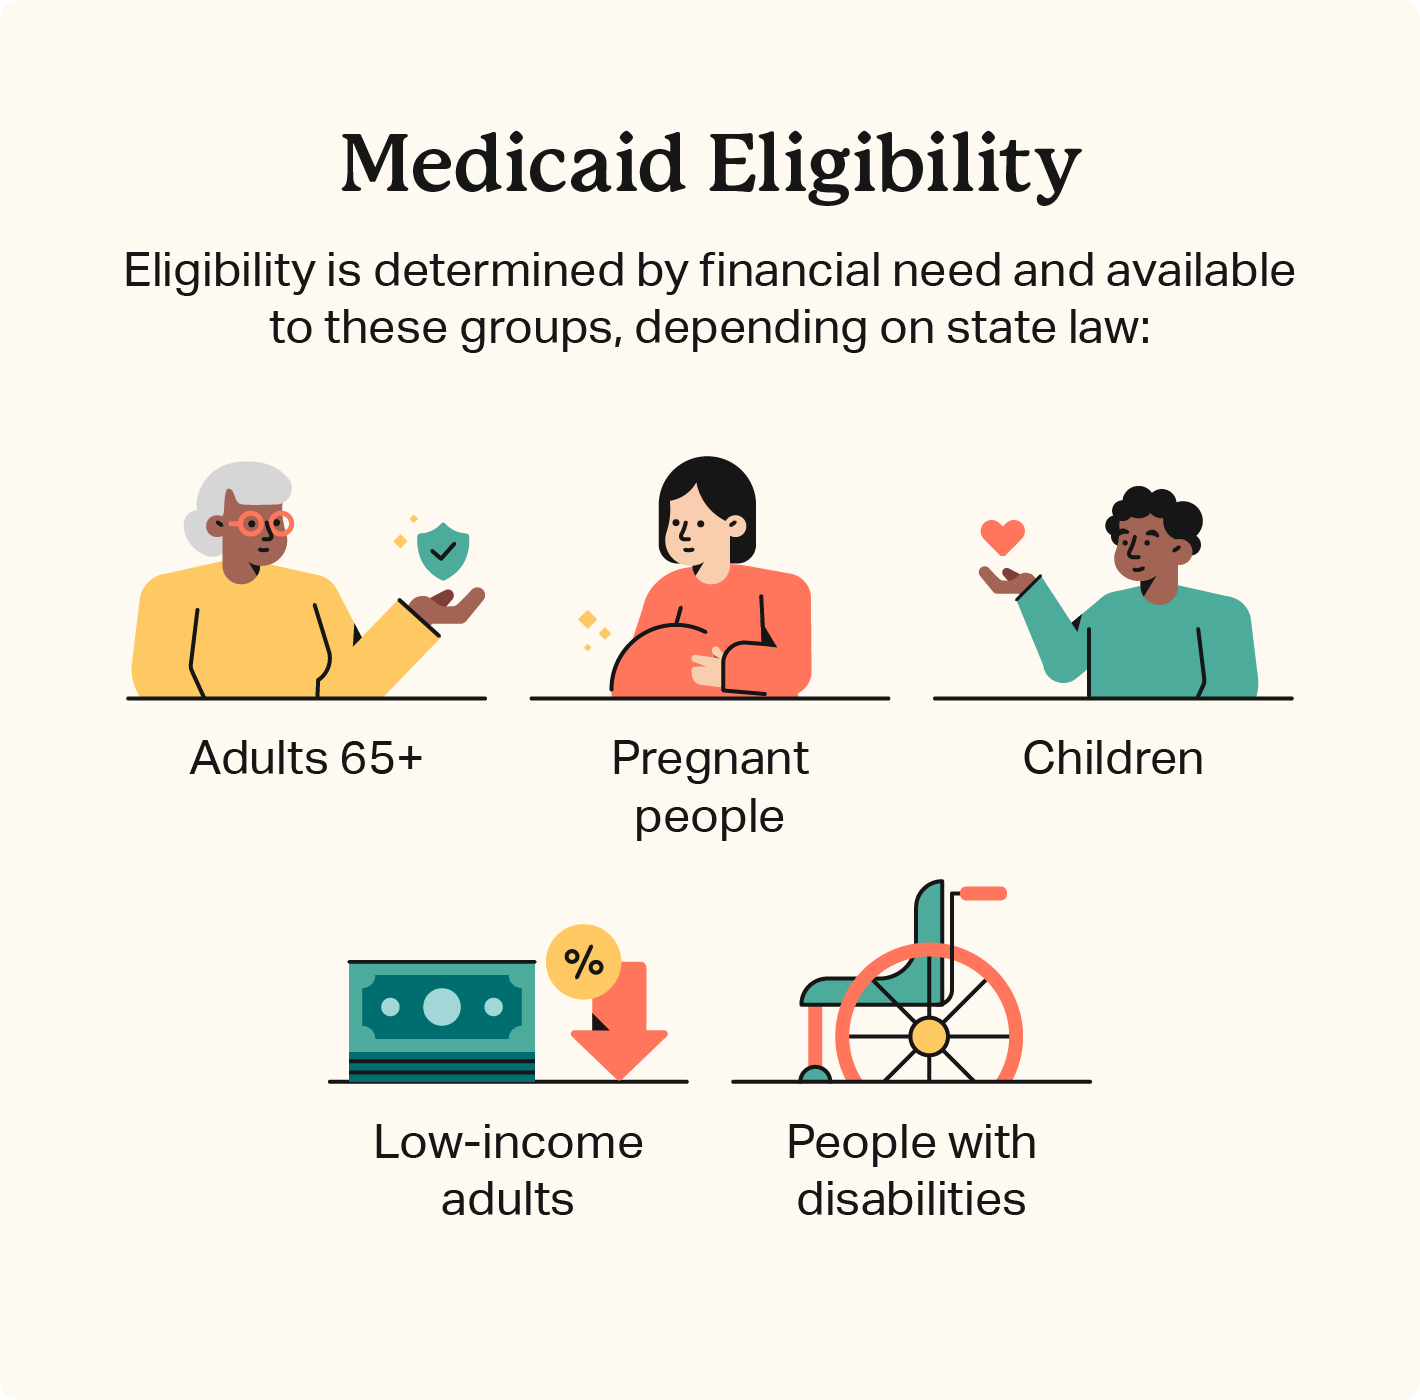 Illustrations indicate the 5 groups that are eligible for Medicaid benefits in addition to financial need considerations.